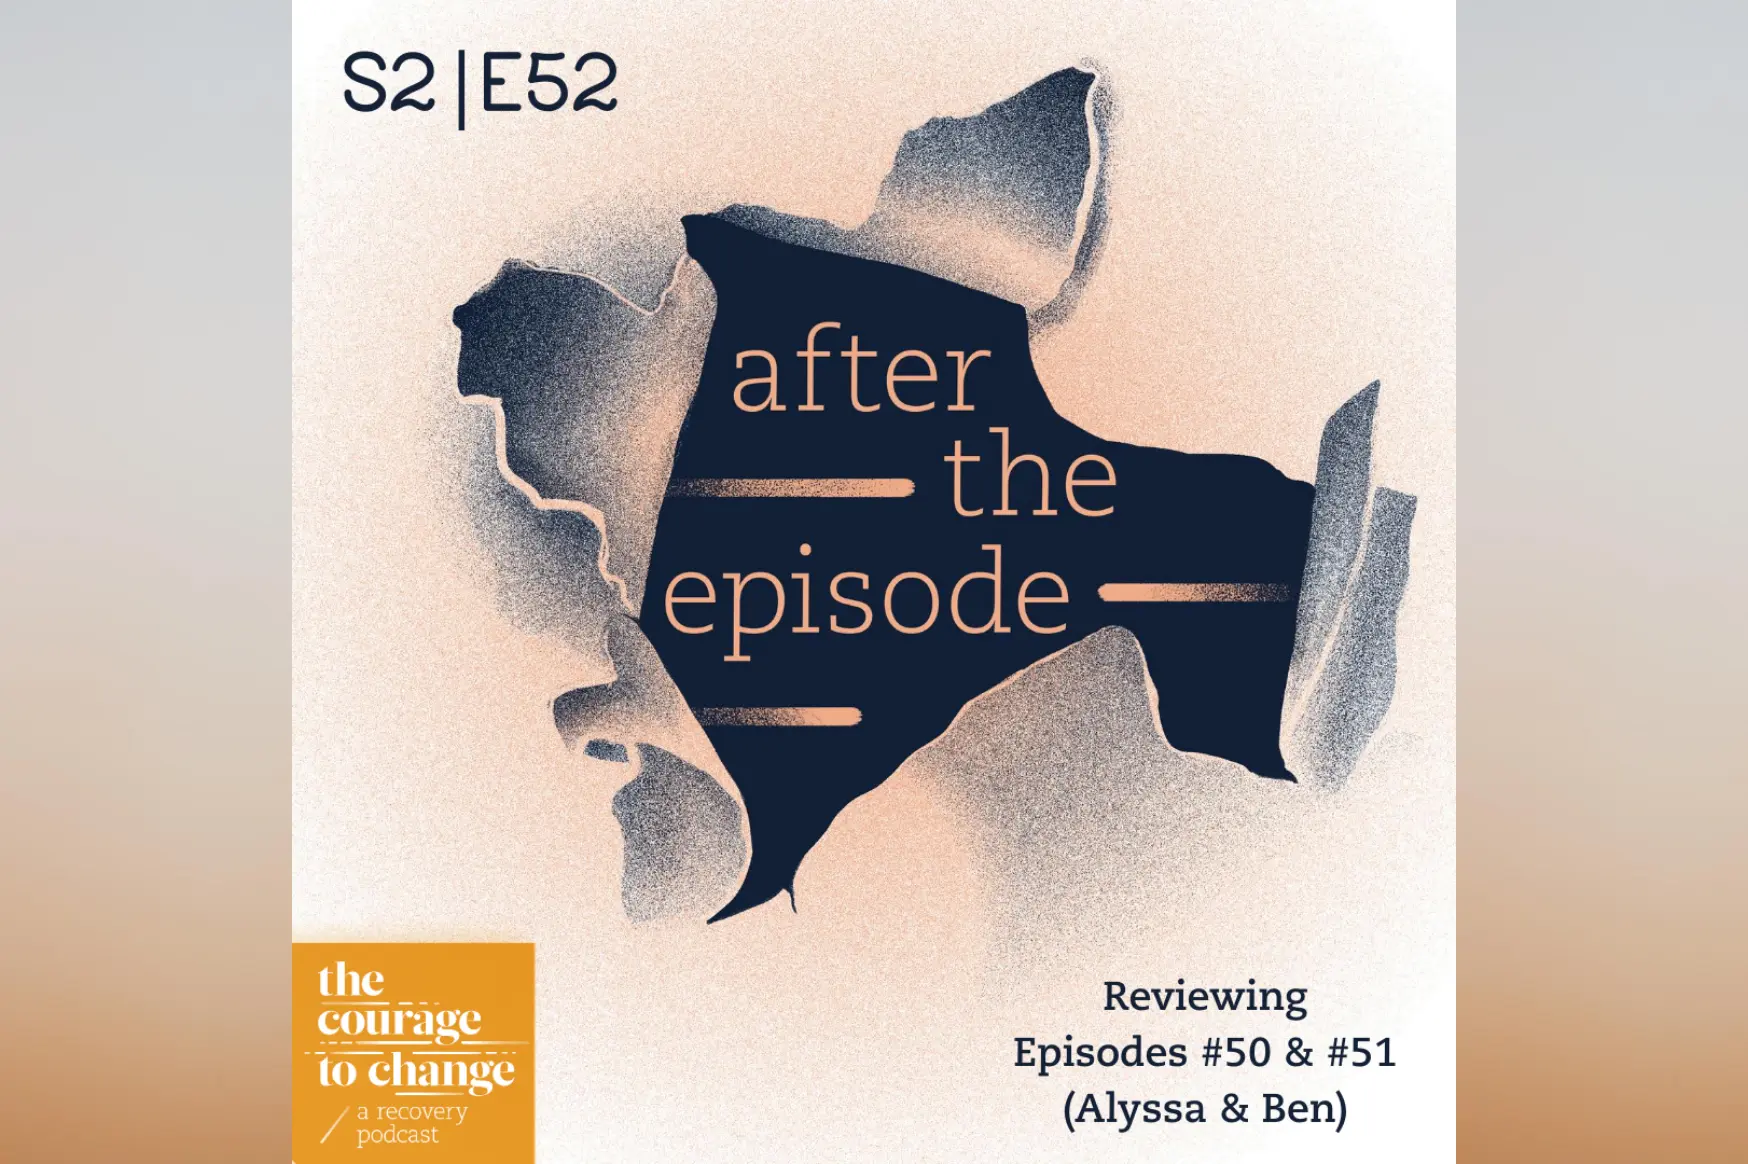 #52 - After the Episode